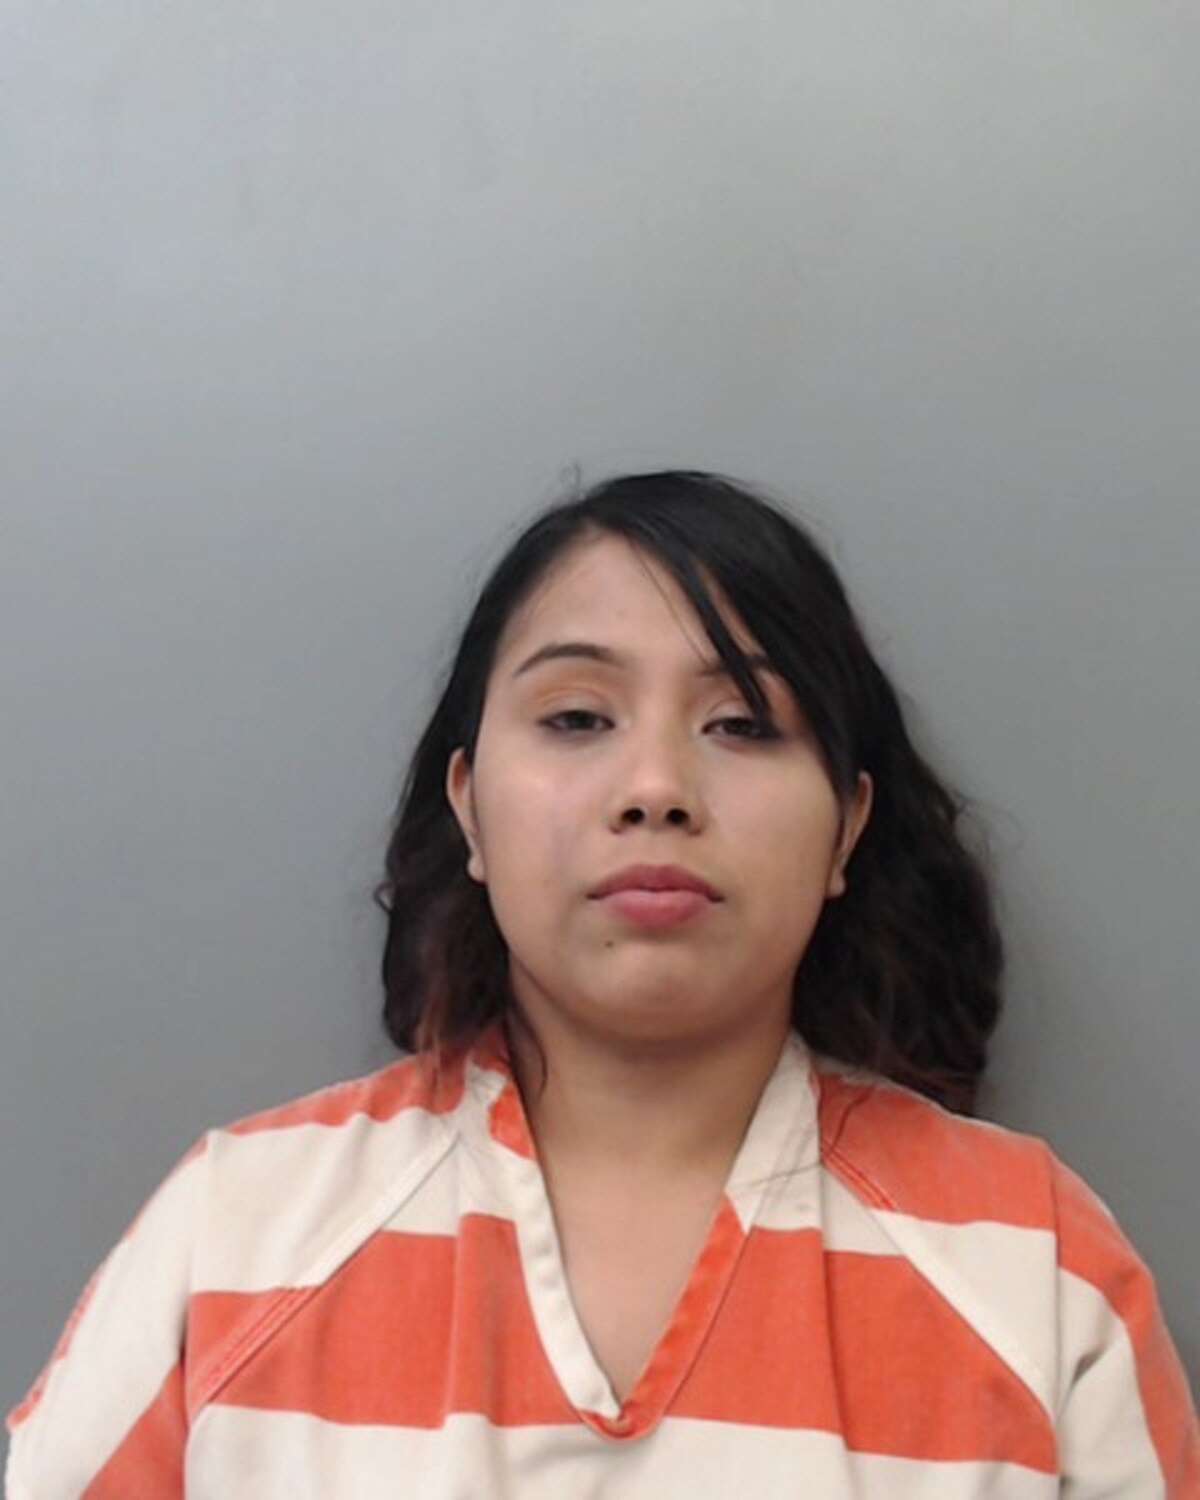 Lizeth Guadalupe Ramirez, 20, was charged with two counts of assault, family violence.